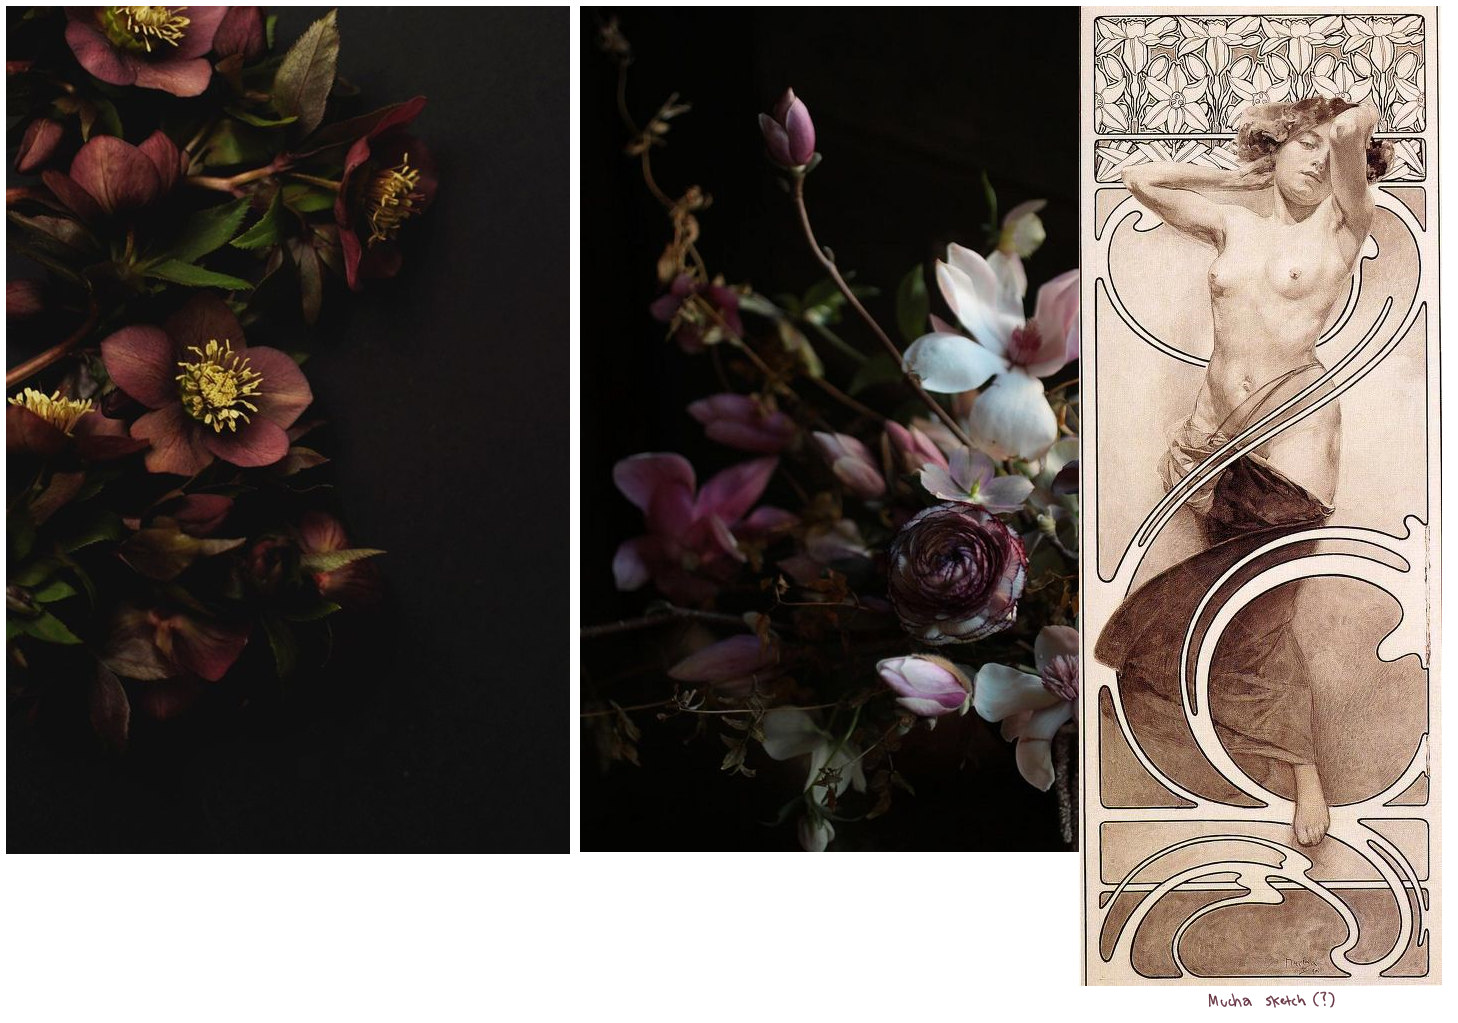 photos of hellebore flowers, and an art nouveau illustration by Alphonse Mucha